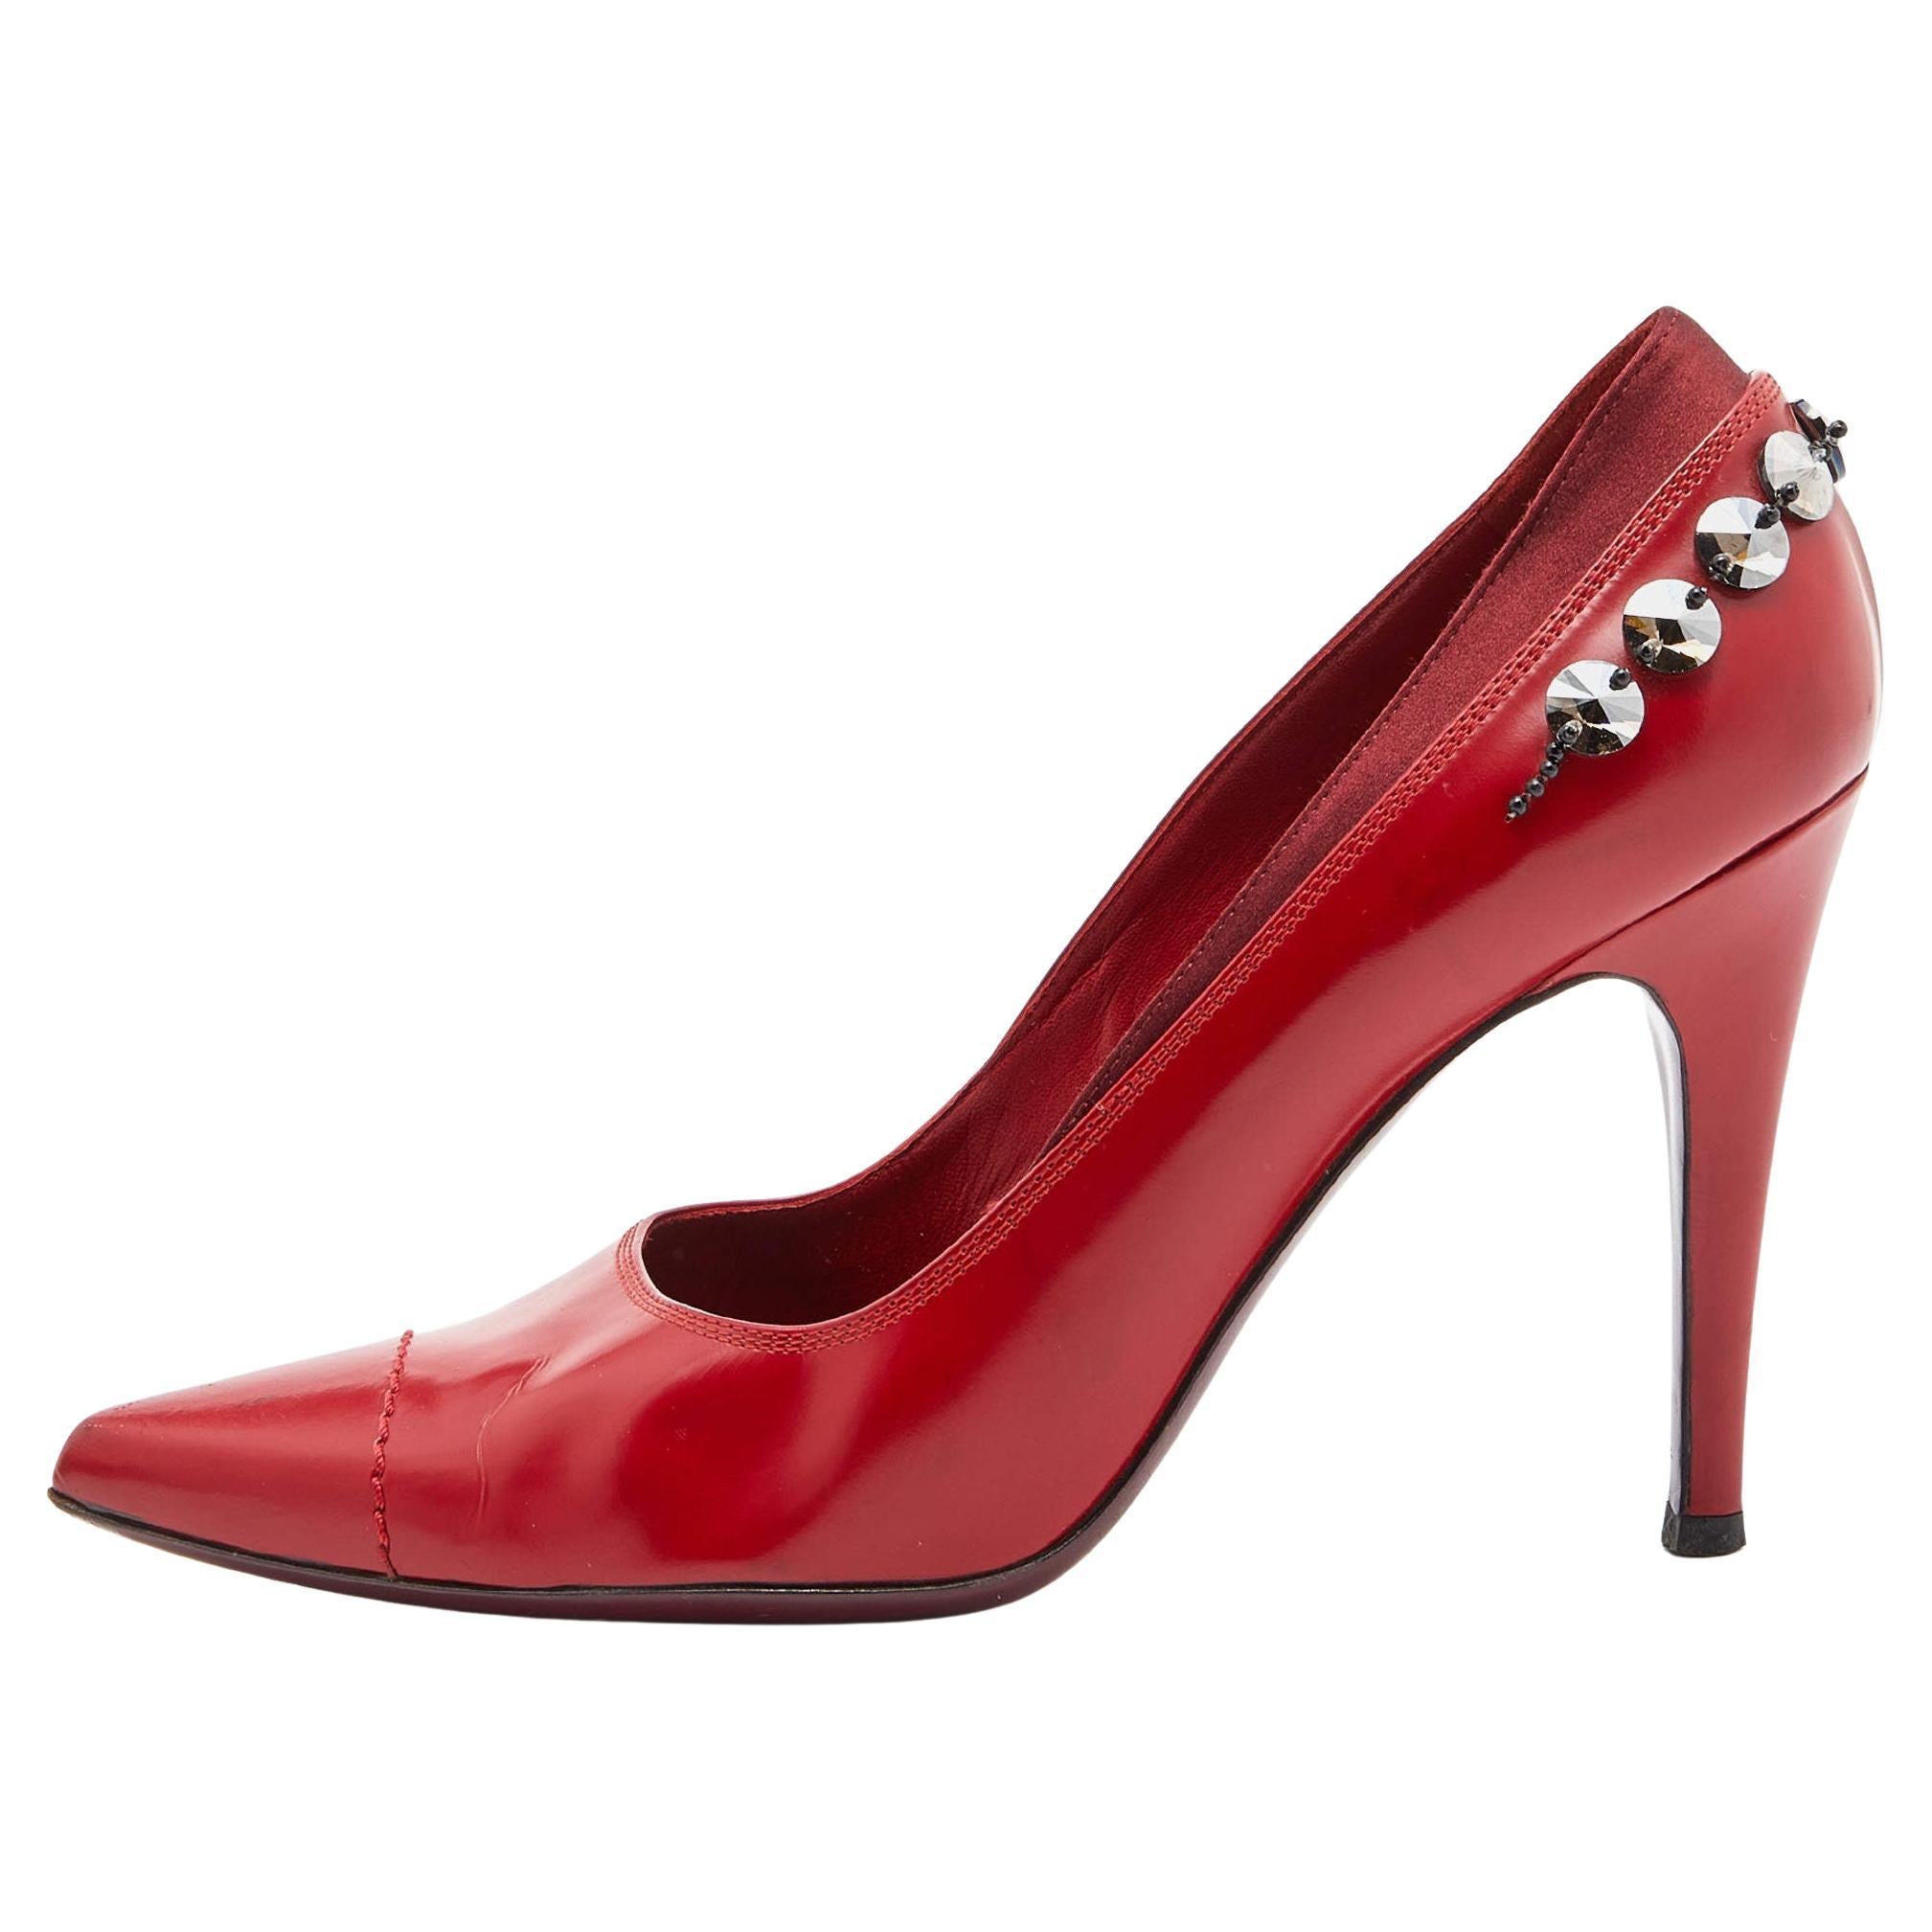 Louis Vuitton Red Leather and Satin Crystal Embellished Pumps Size 39 For Sale